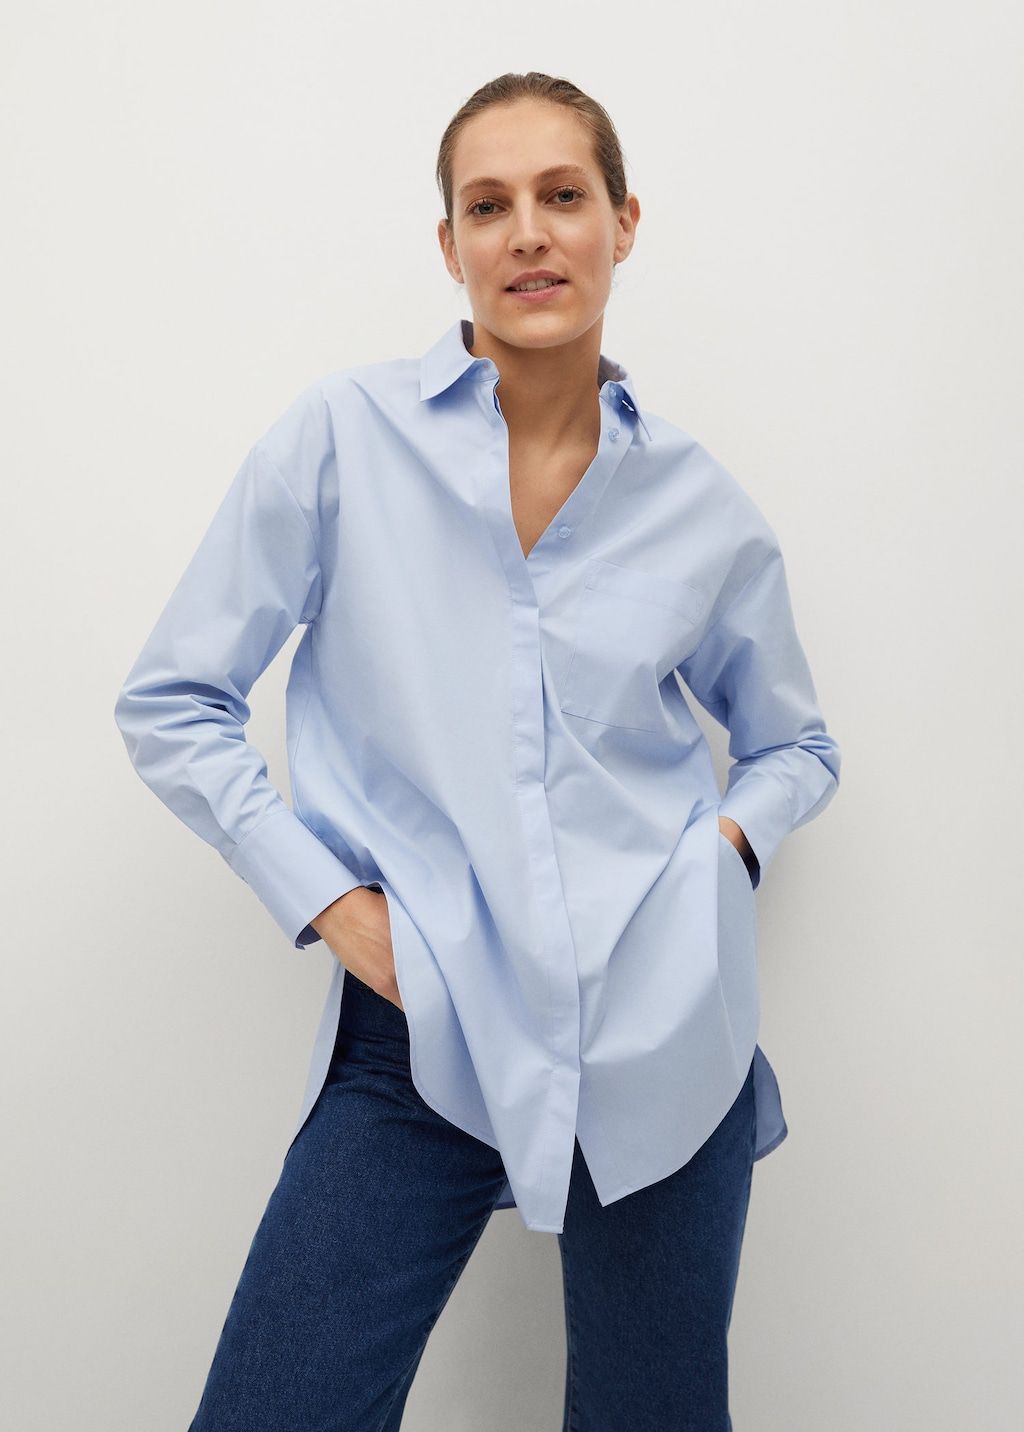 The 6 Best Colorful Button-Down Shirts for Women | Who What Wear